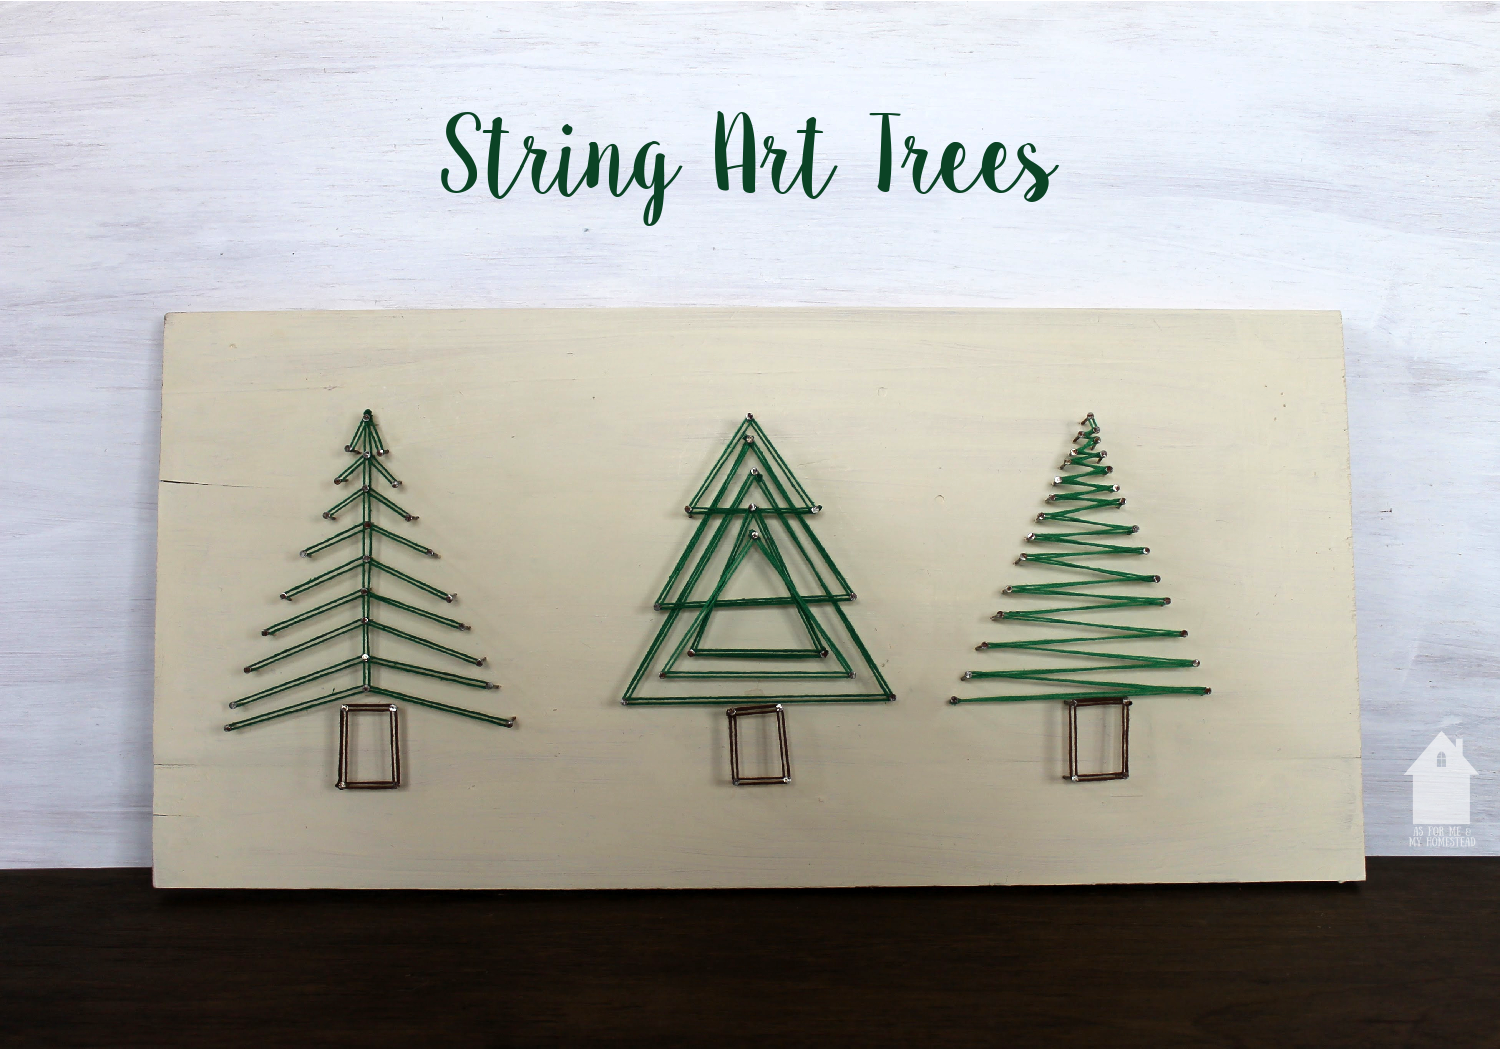 String Art Trees - As For Me and My Homestead